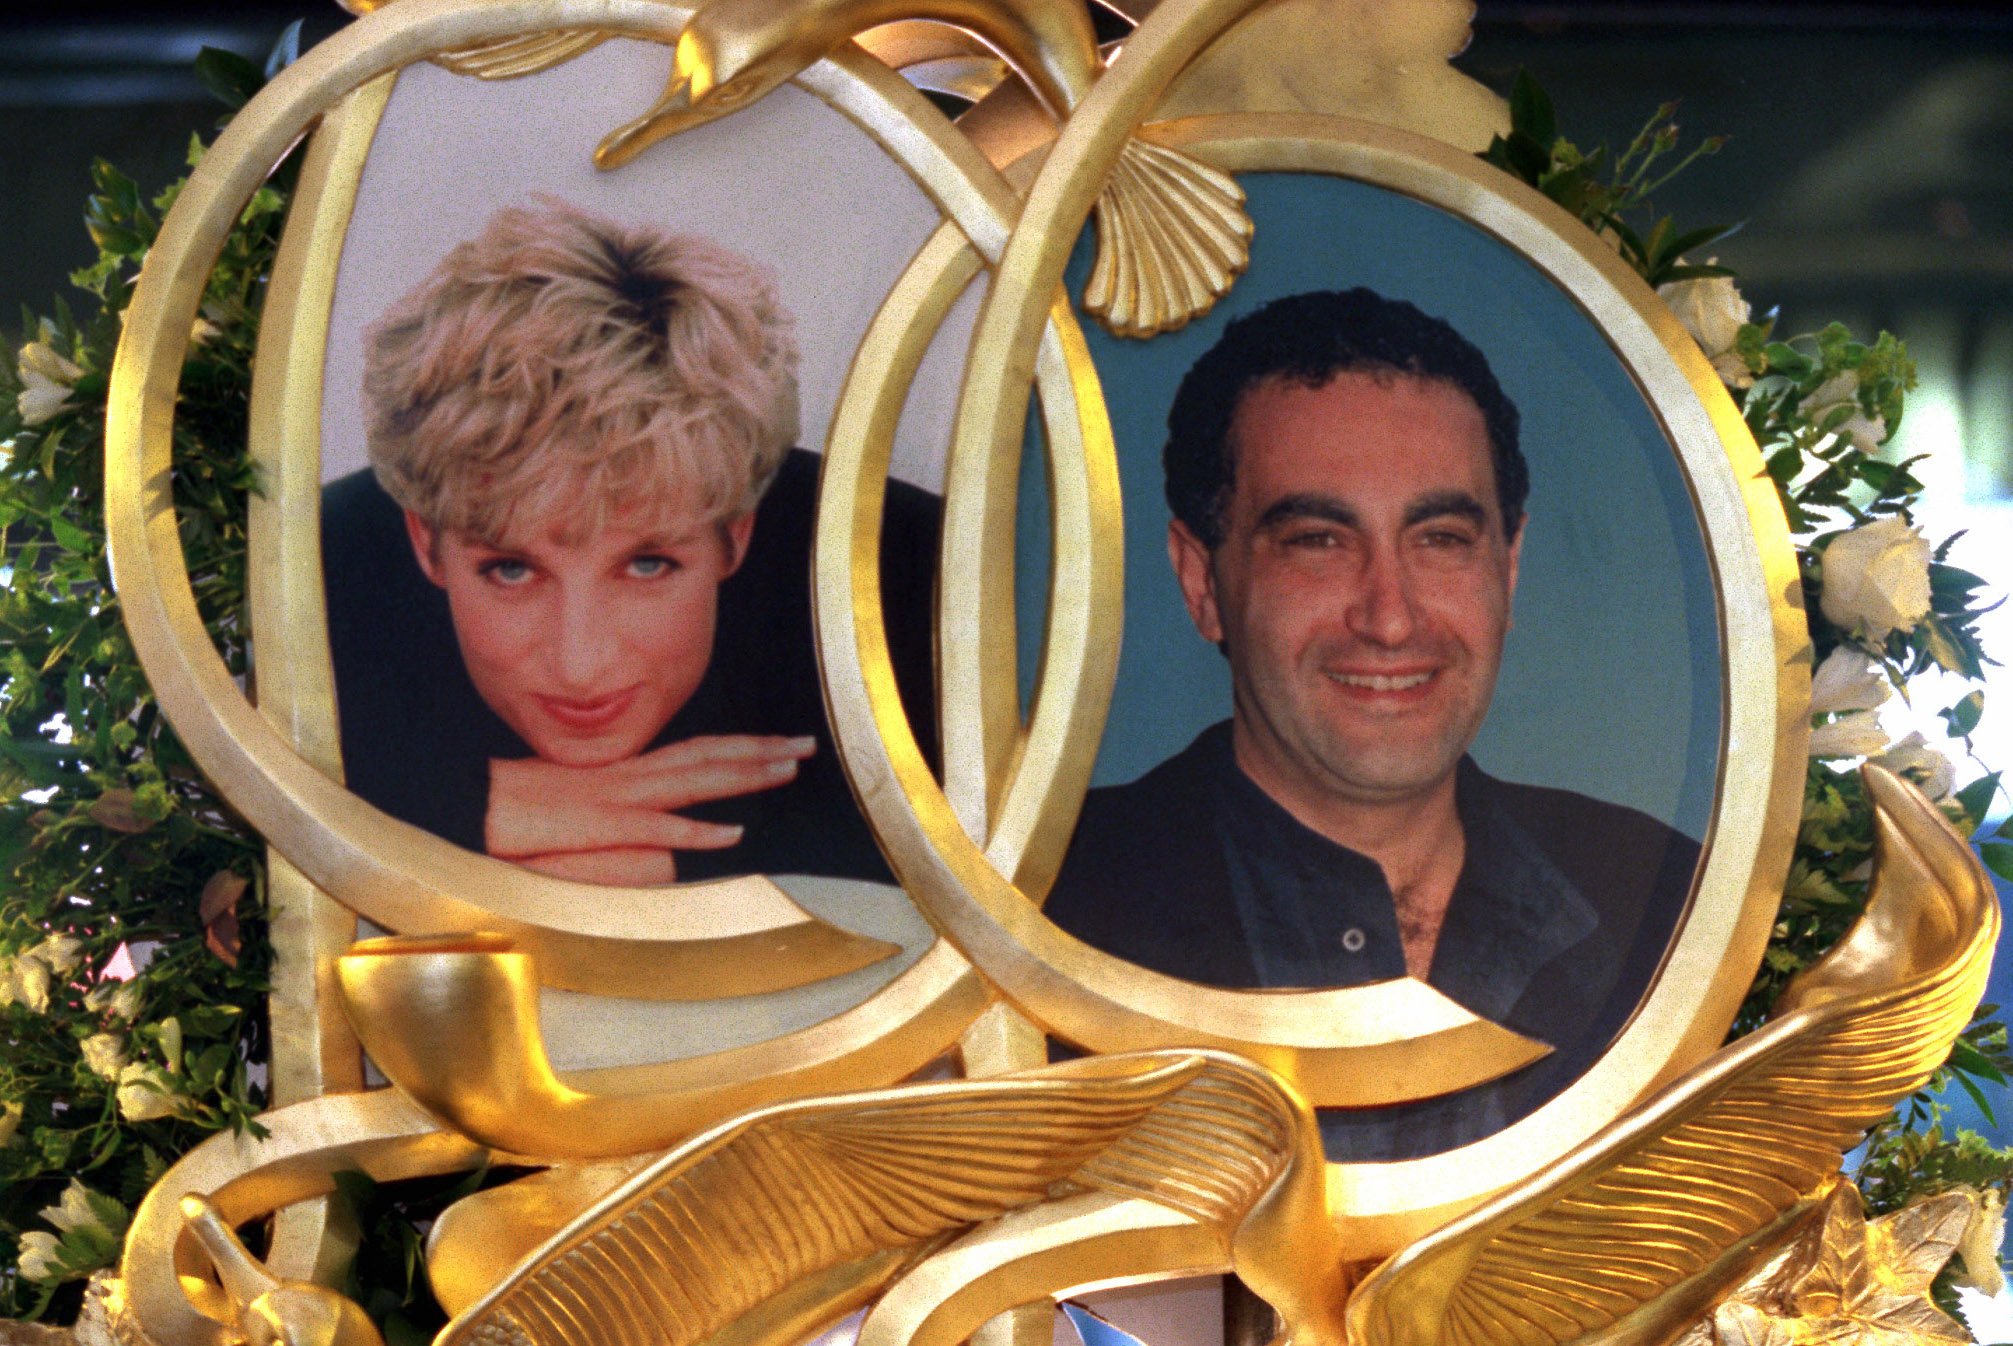 Photos of Diana and Dodi incorporated into the work exhibited at Harrods | Photo: GettyImages